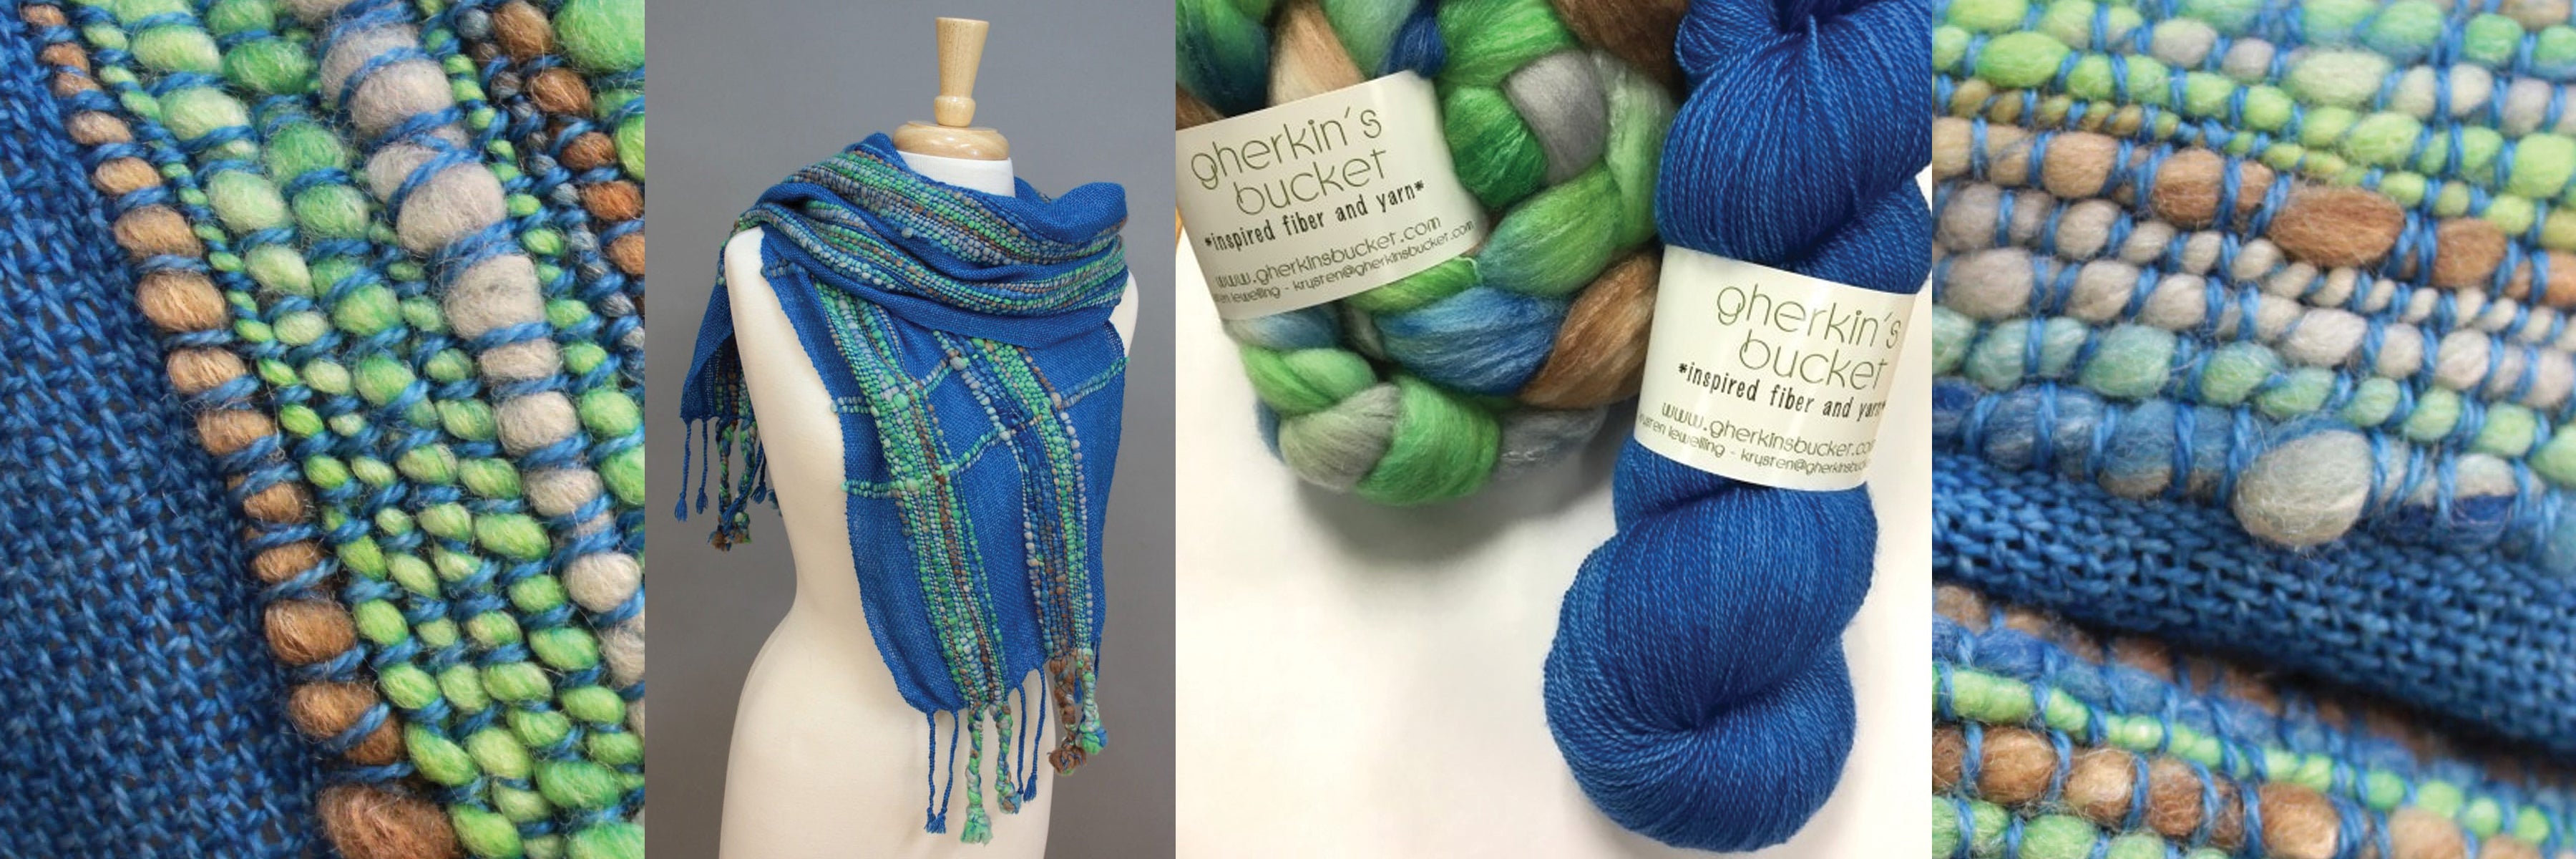 How to Spin and Weave Thick and Thin Yarn - Gherkin's Bucket Collaboration